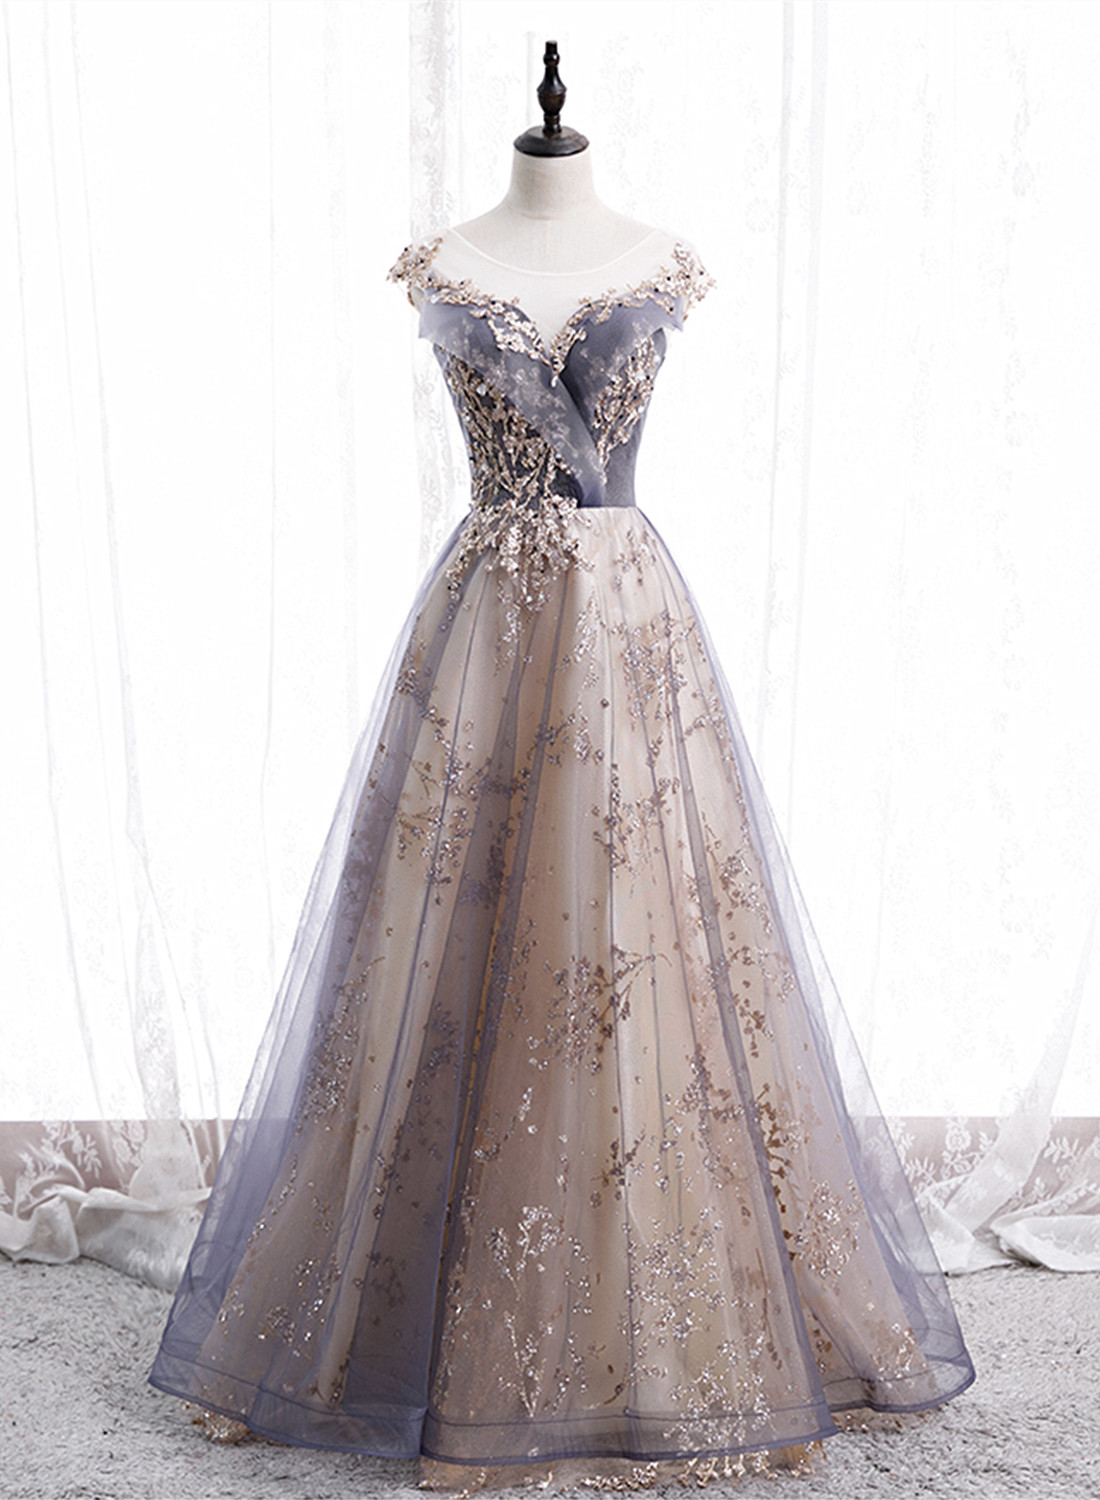 Elegant A-line Tulle with Lace Applique Formal Prom Dress, Beautiful Long Prom Dress, Banquet Party Dress